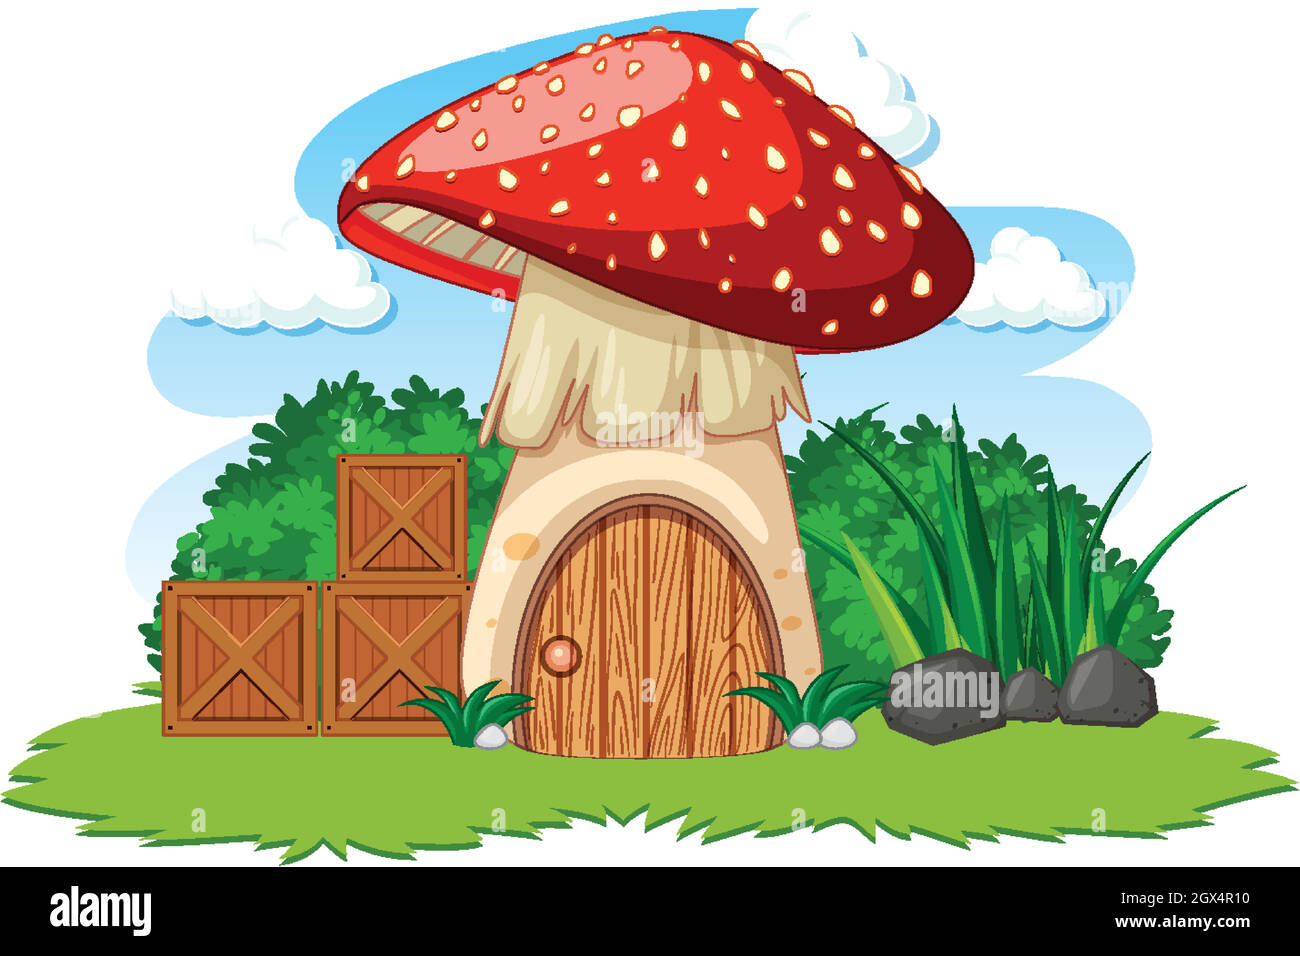 Mushroom house and some grass cartoon style on white background Stock Vector